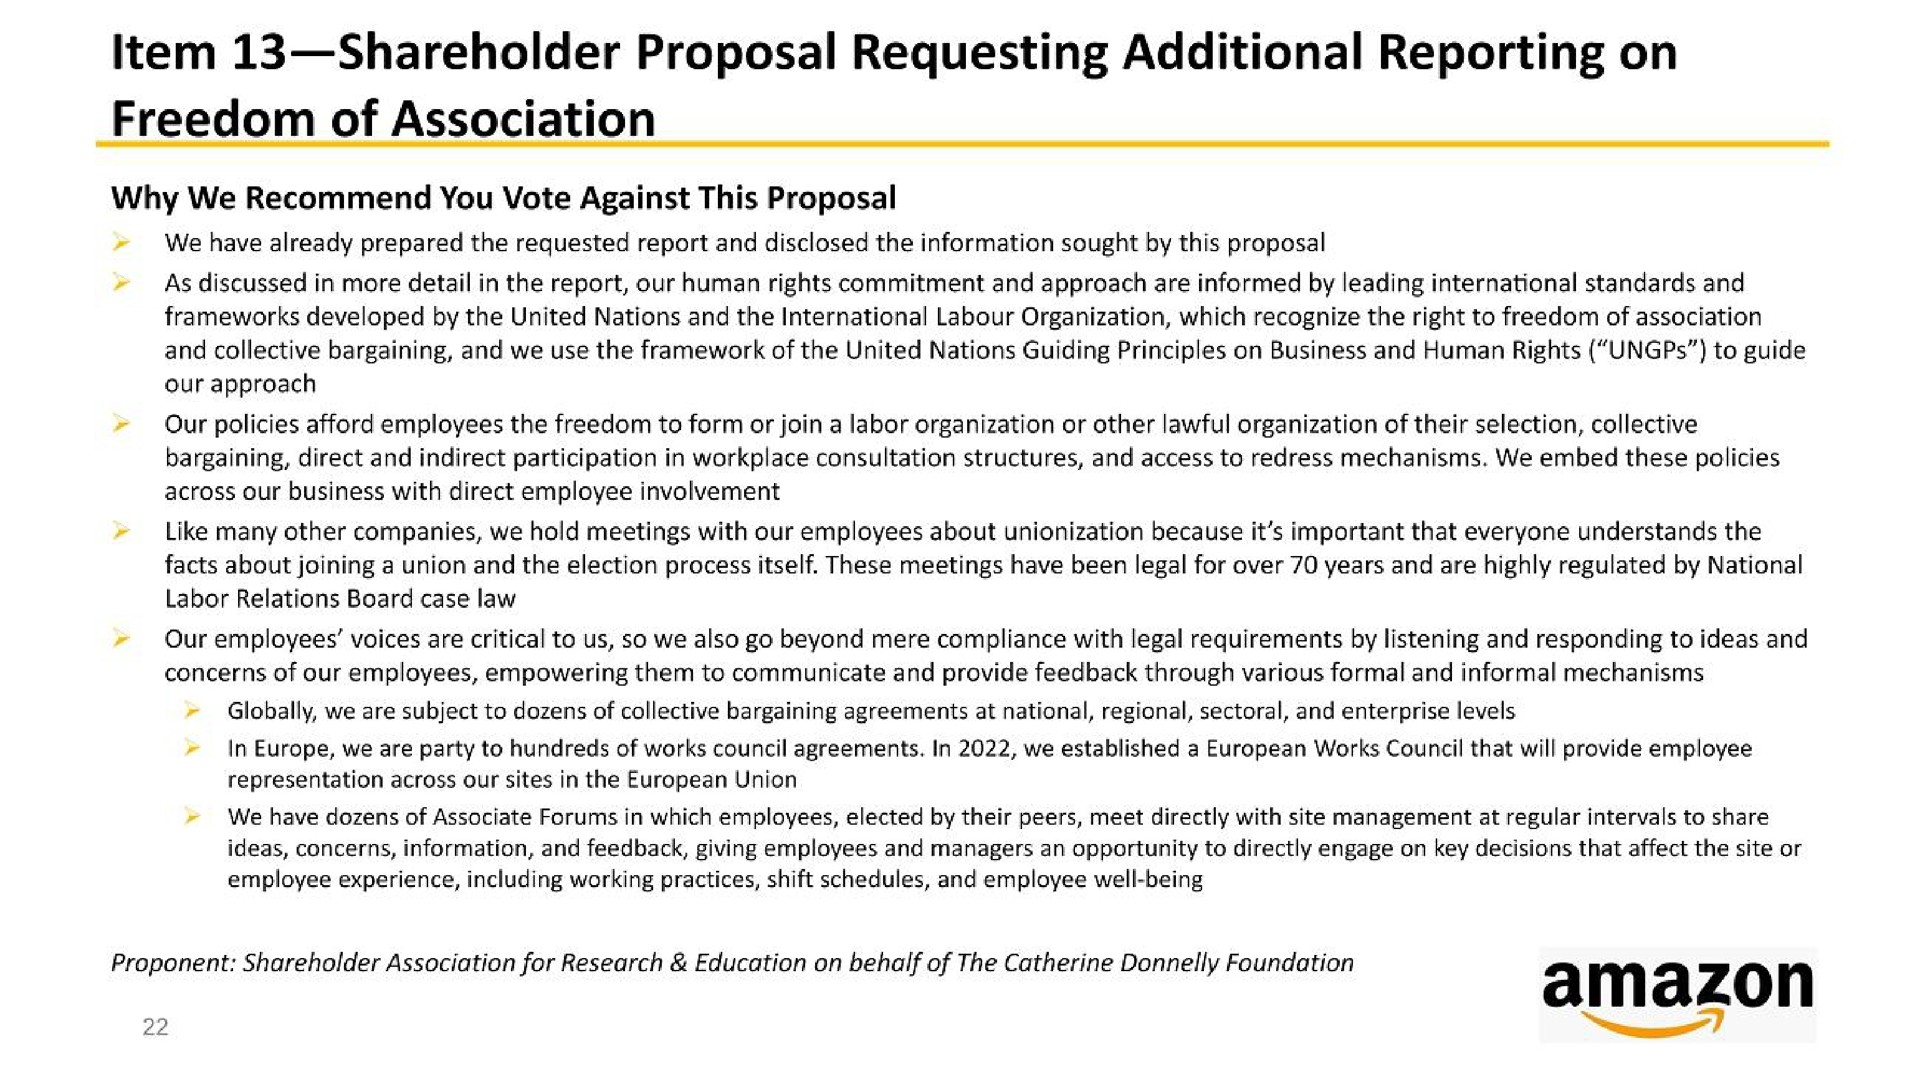 item shareholder proposal requesting additional reporting on freedom of association | Amazon